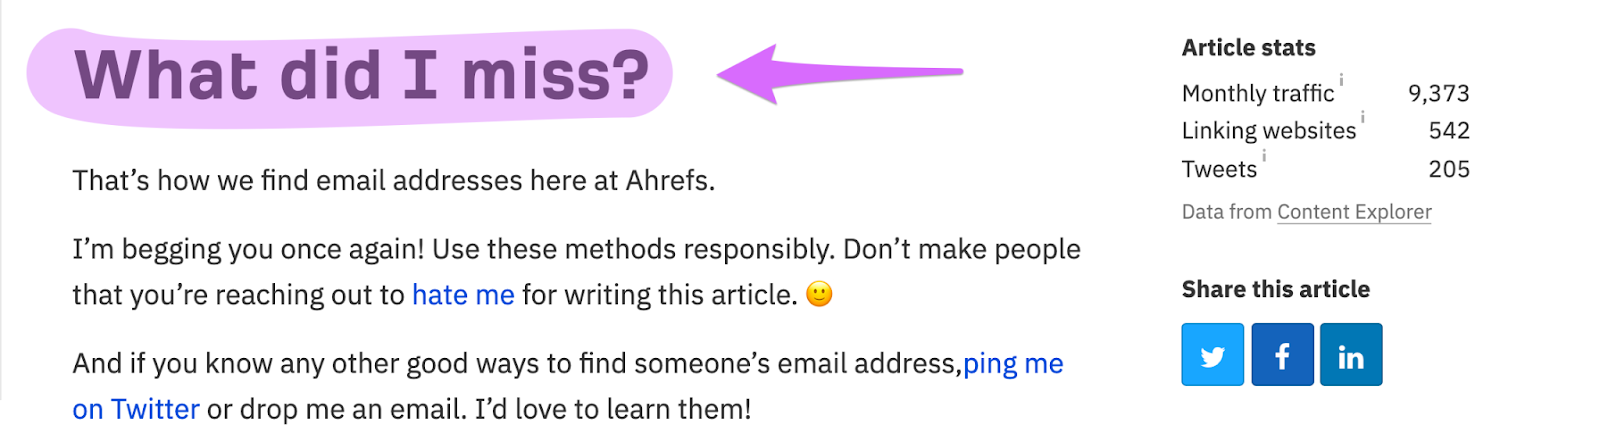 ahrefs asking readers a question whether he missed anything